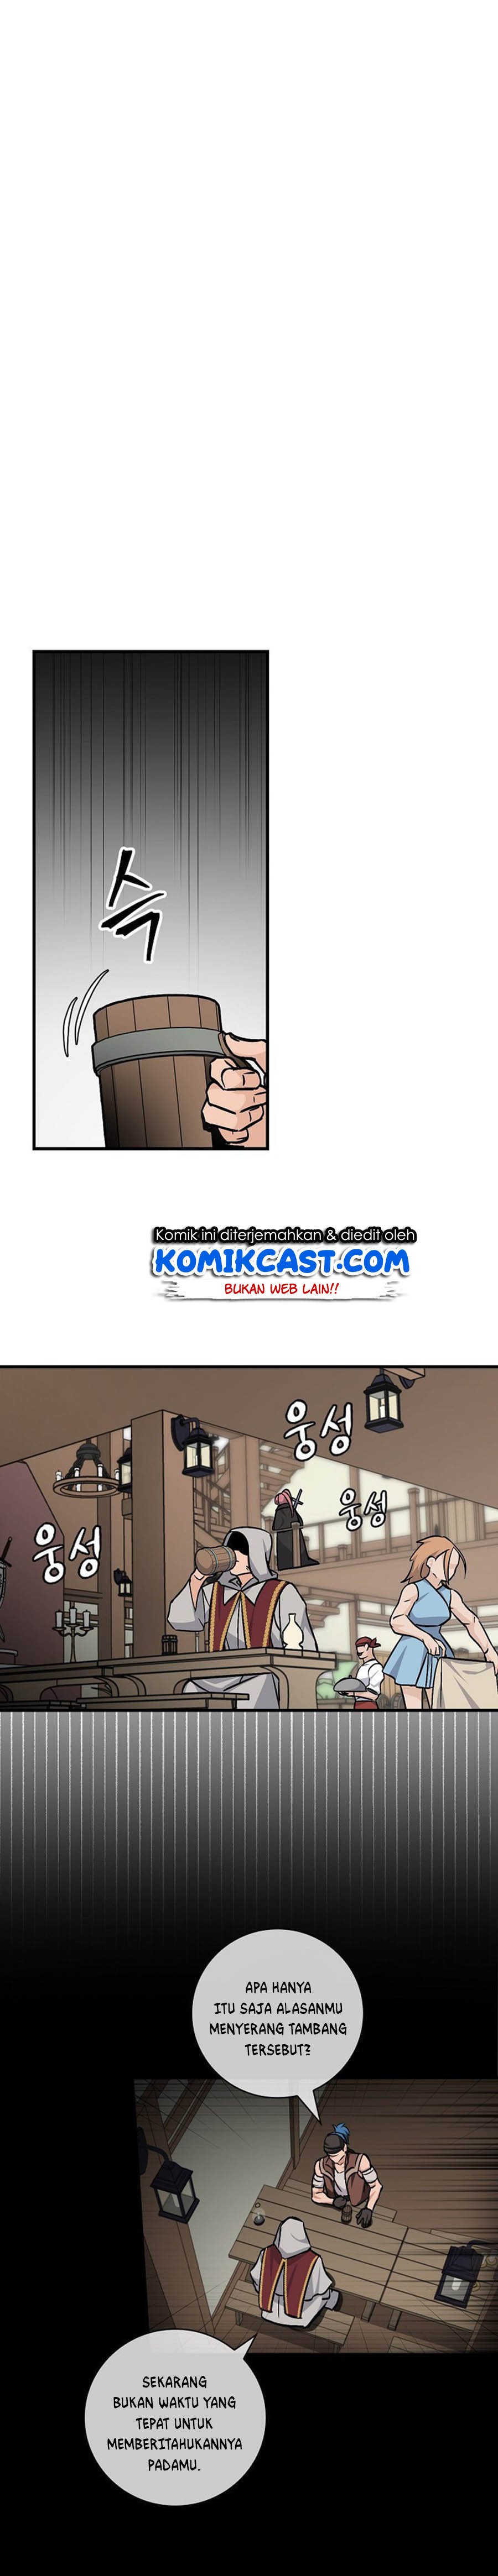 Leveling Up, by Only Eating! Chapter 36